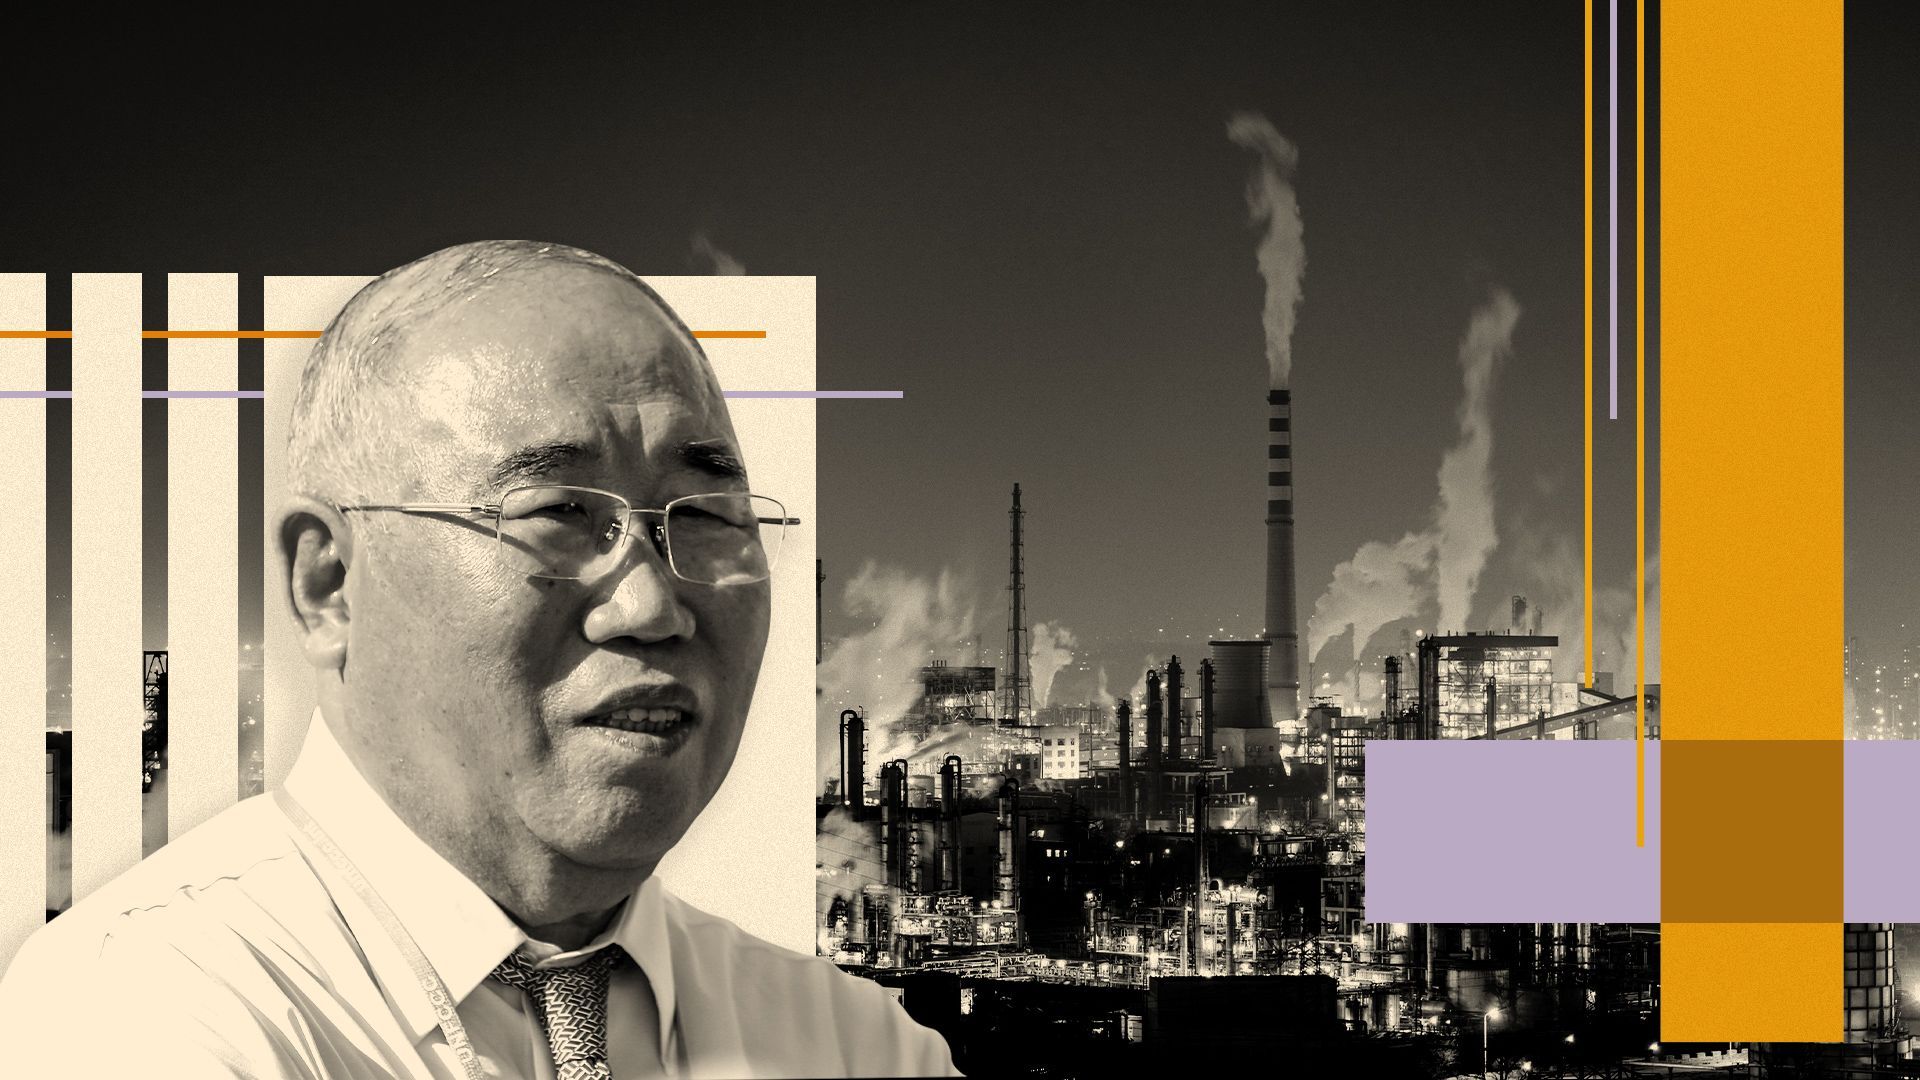 Photo illustration of Xie Zhenhua over a background of a petrochemical plant and oil refinery.